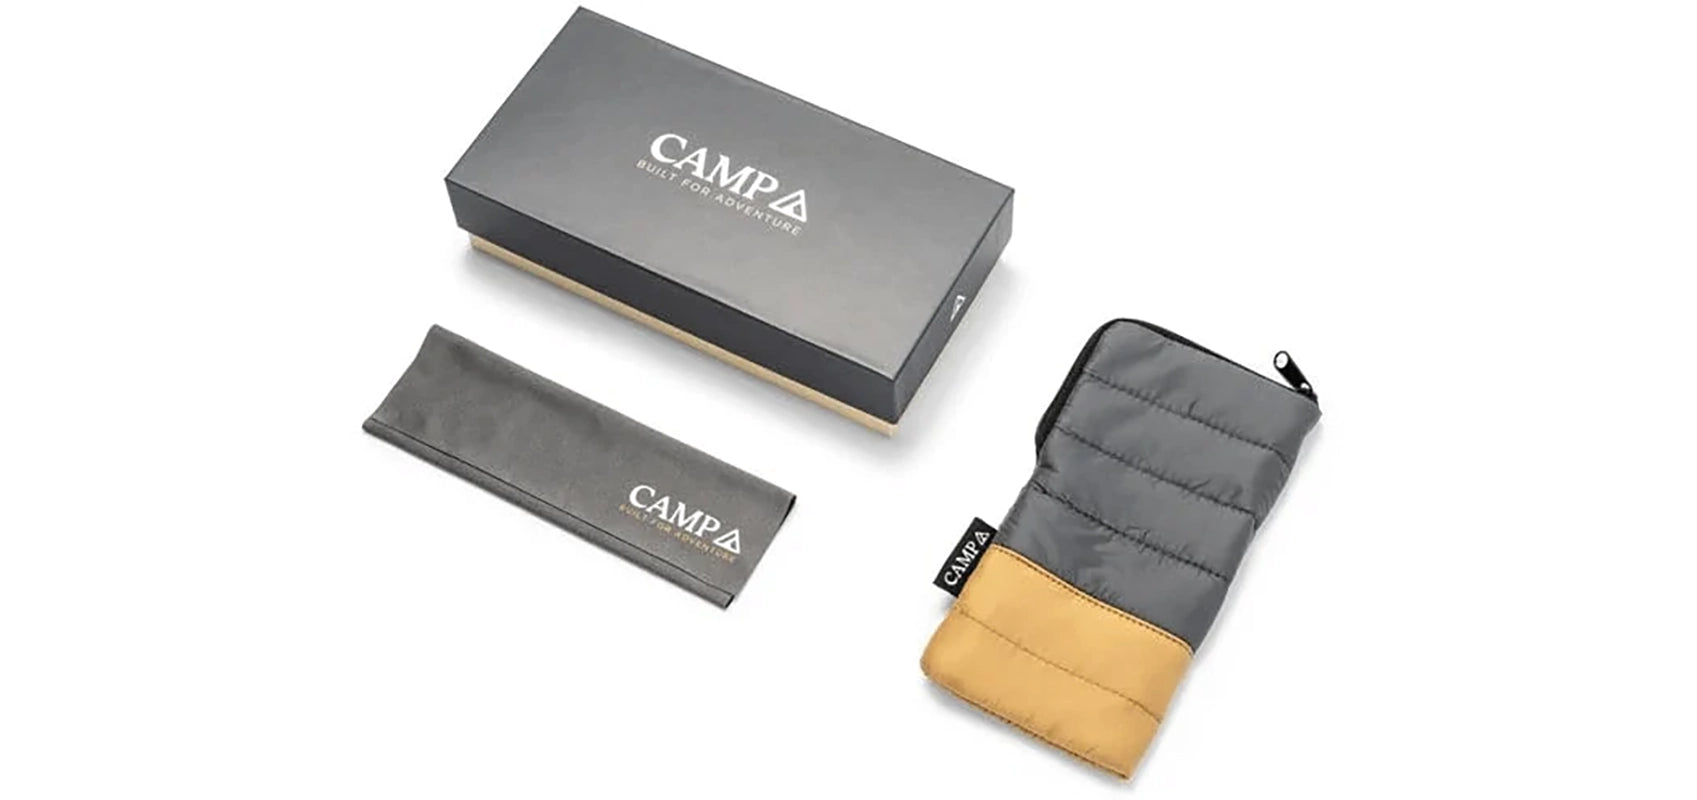 Camp Sunglasses Packaging that includes: box, pouch and cleaning cloth